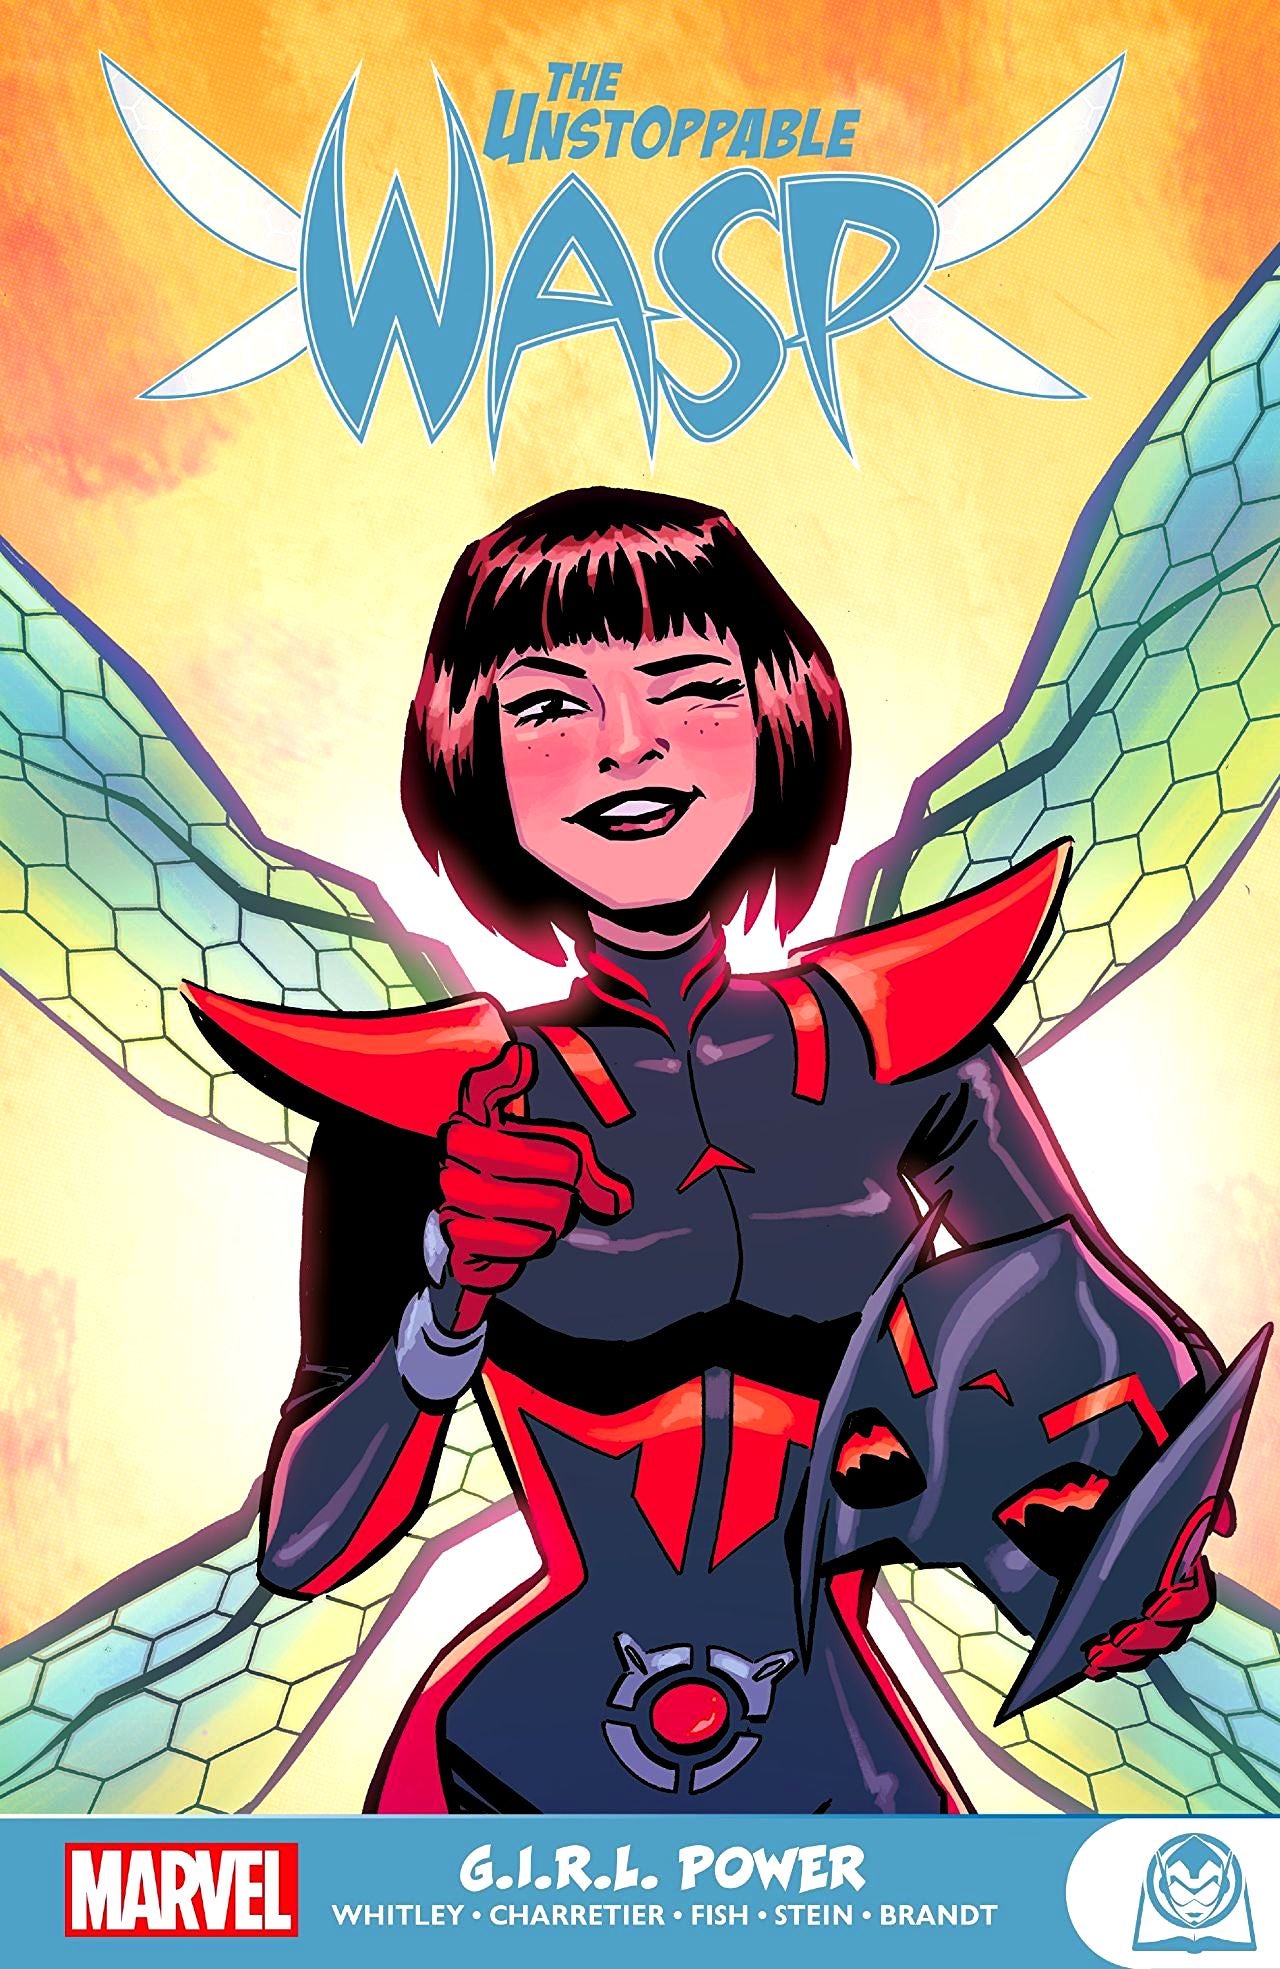 Unstoppable Wasp (2017): G.I.R.L. Power